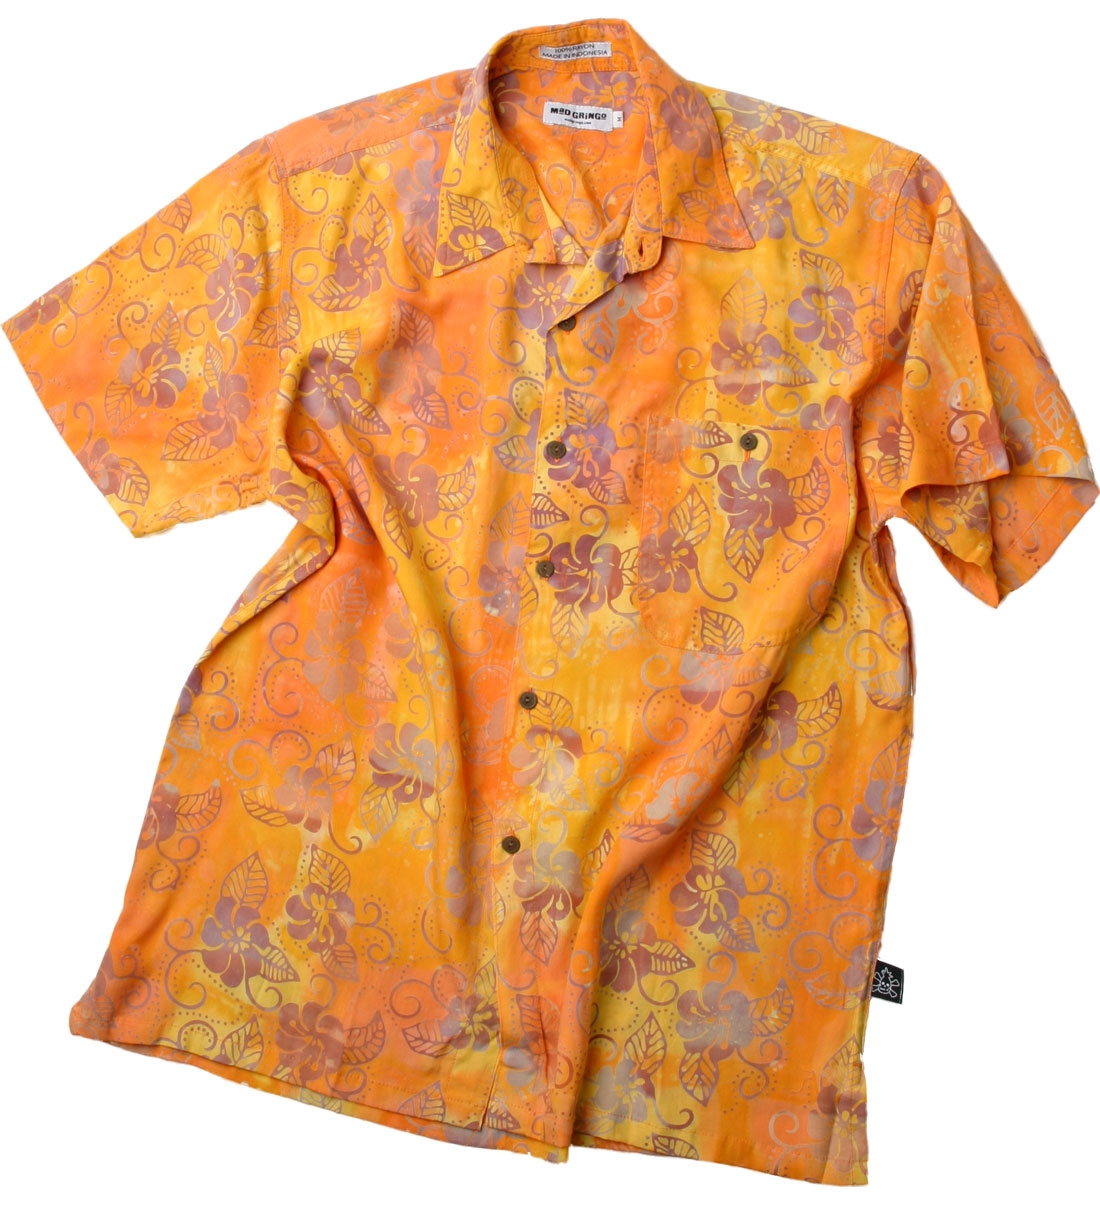 Mango Madness Tropical Shirt from Mad Gringo